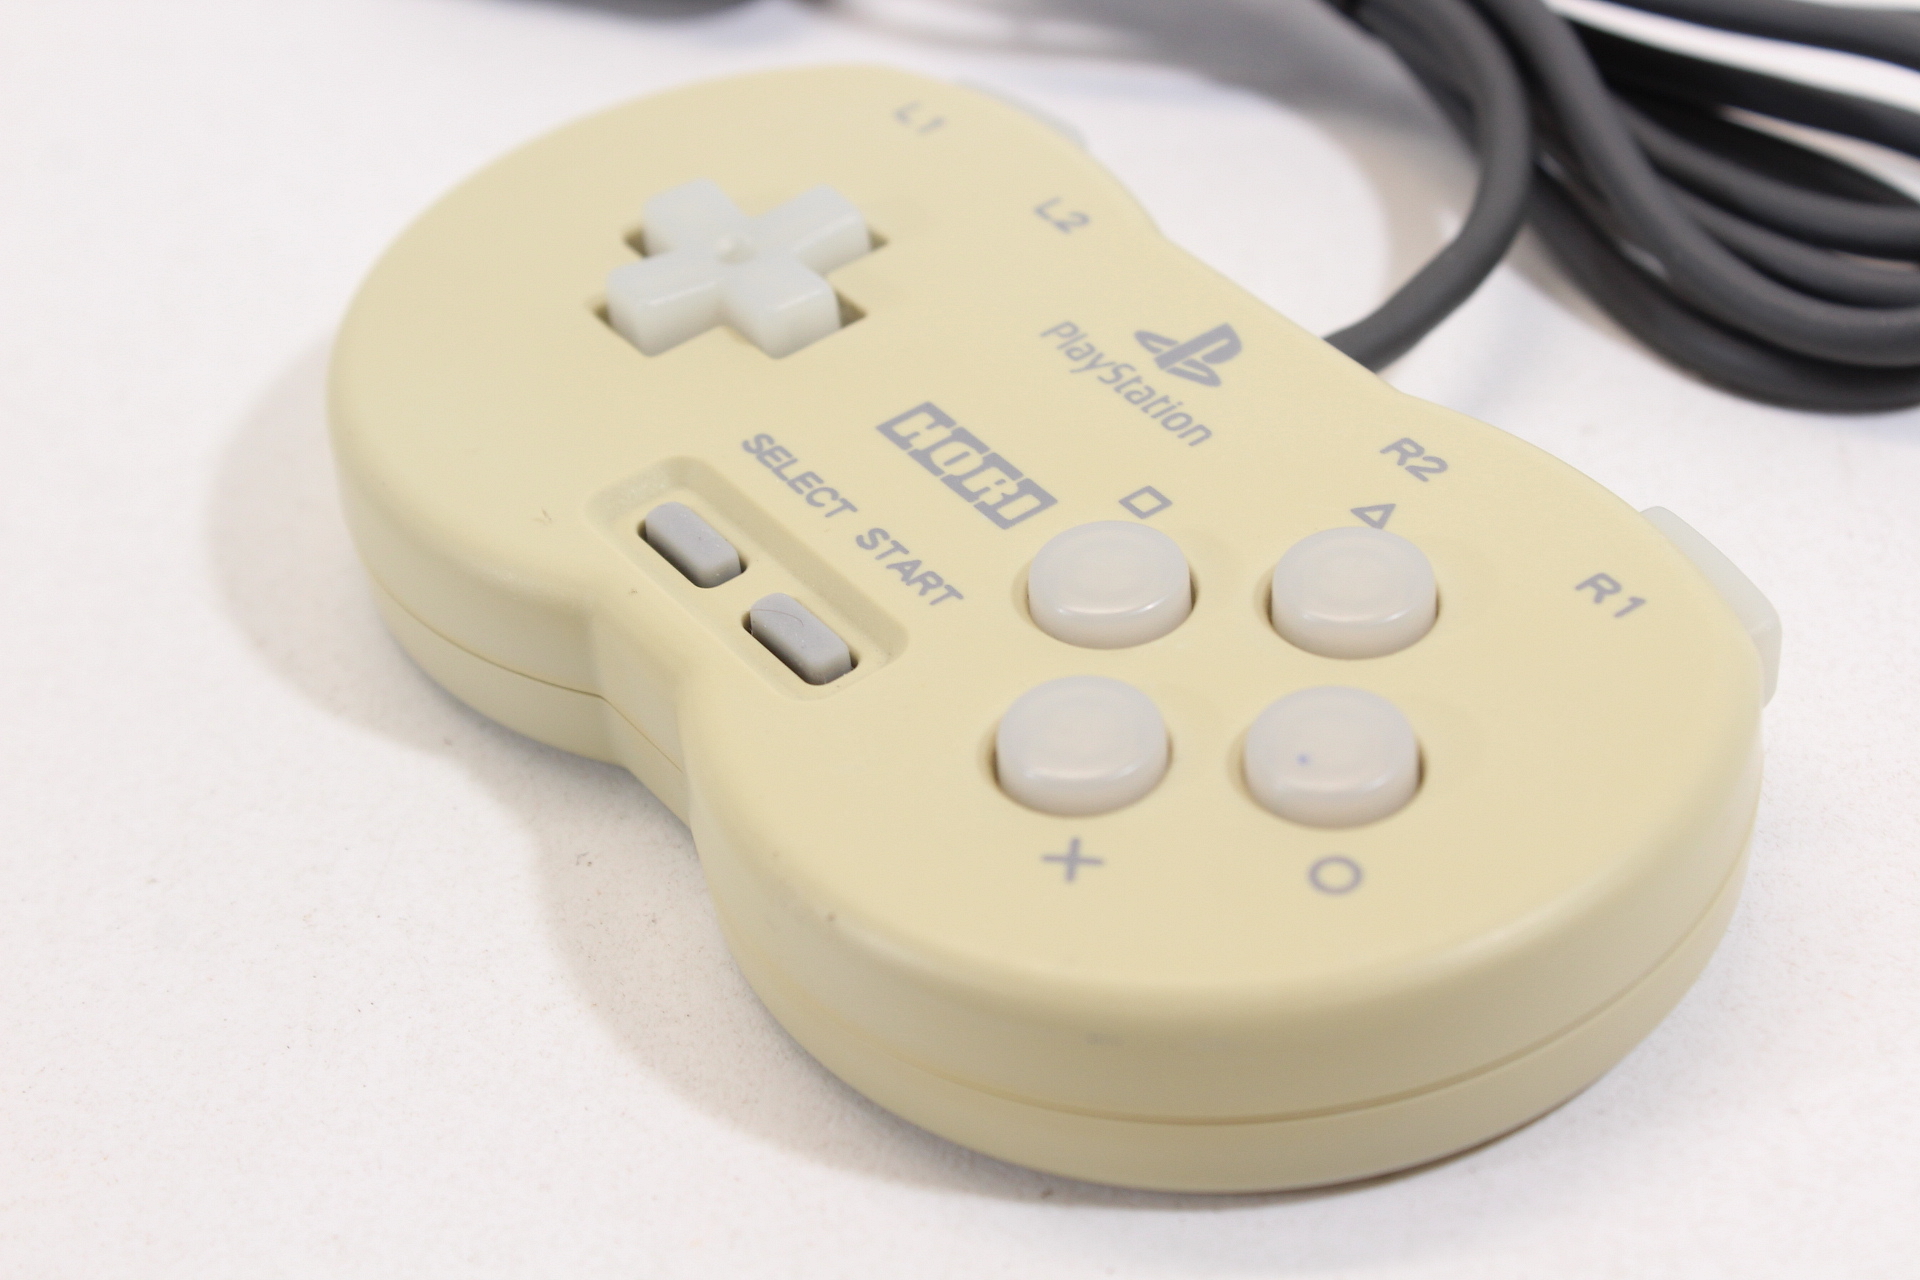 Official Hori Off White Pocket Controller Discolored Playstation 2